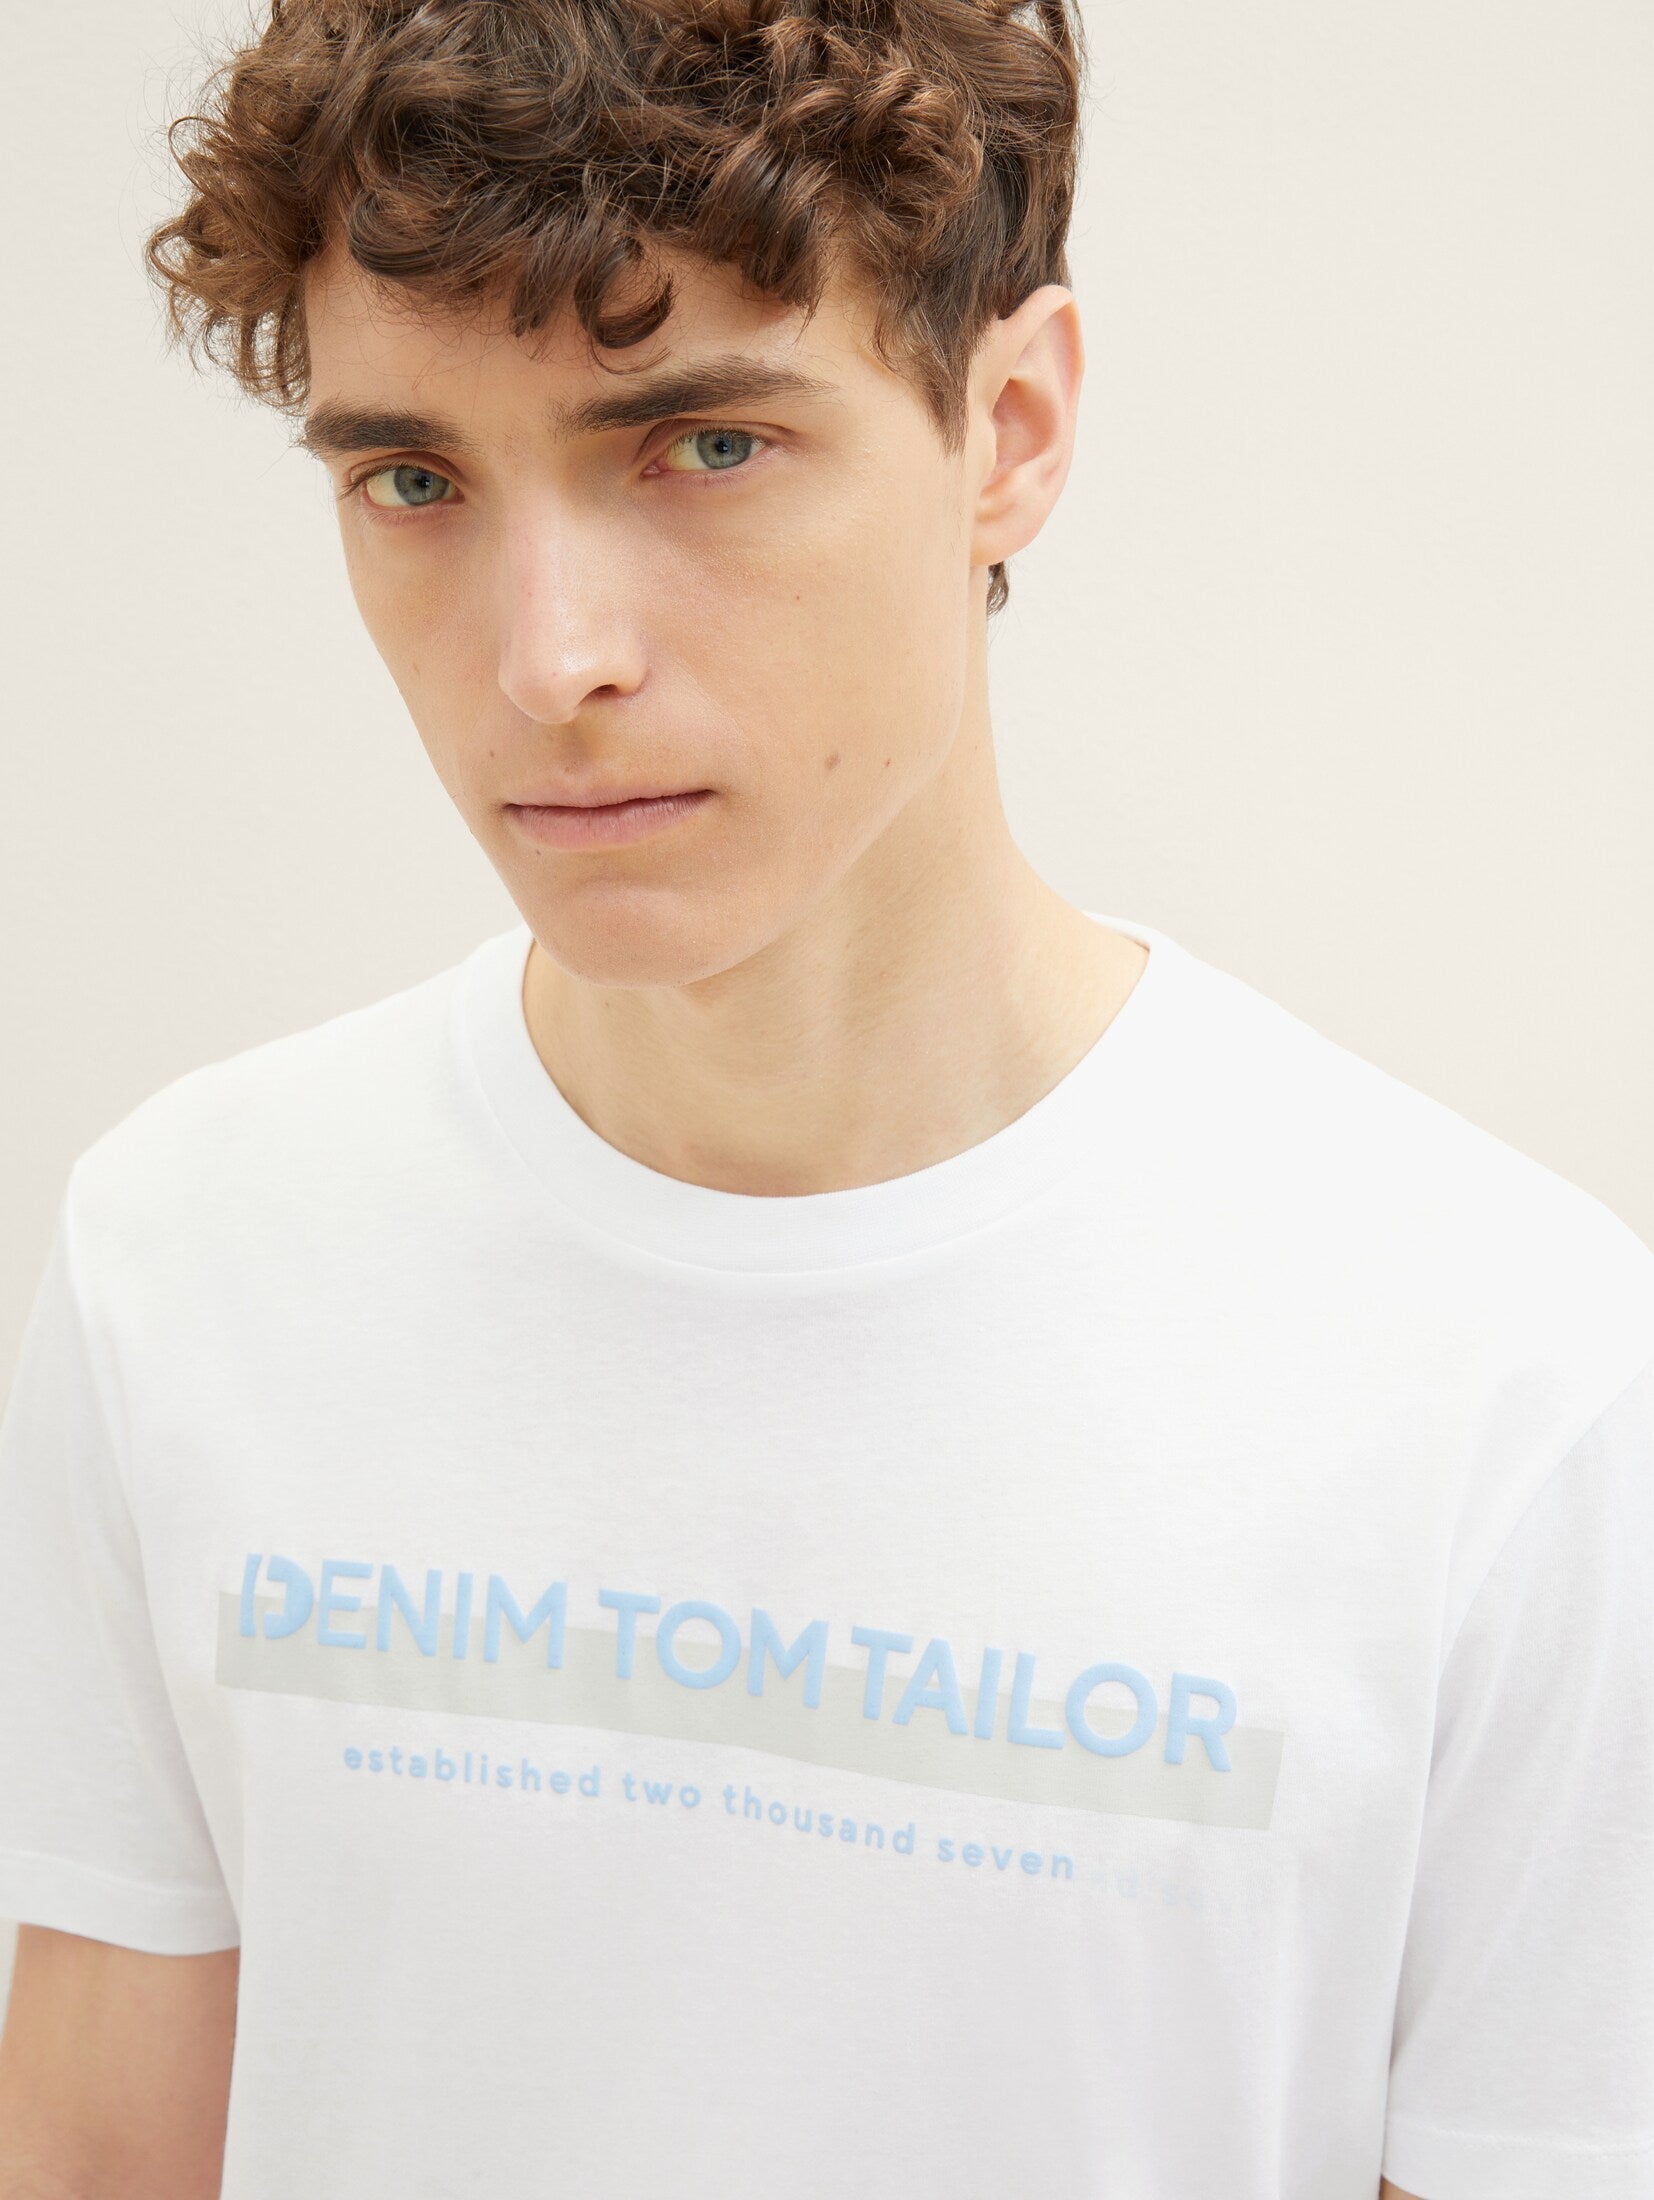 Tom Tailor White T-shirt with a Logo Print